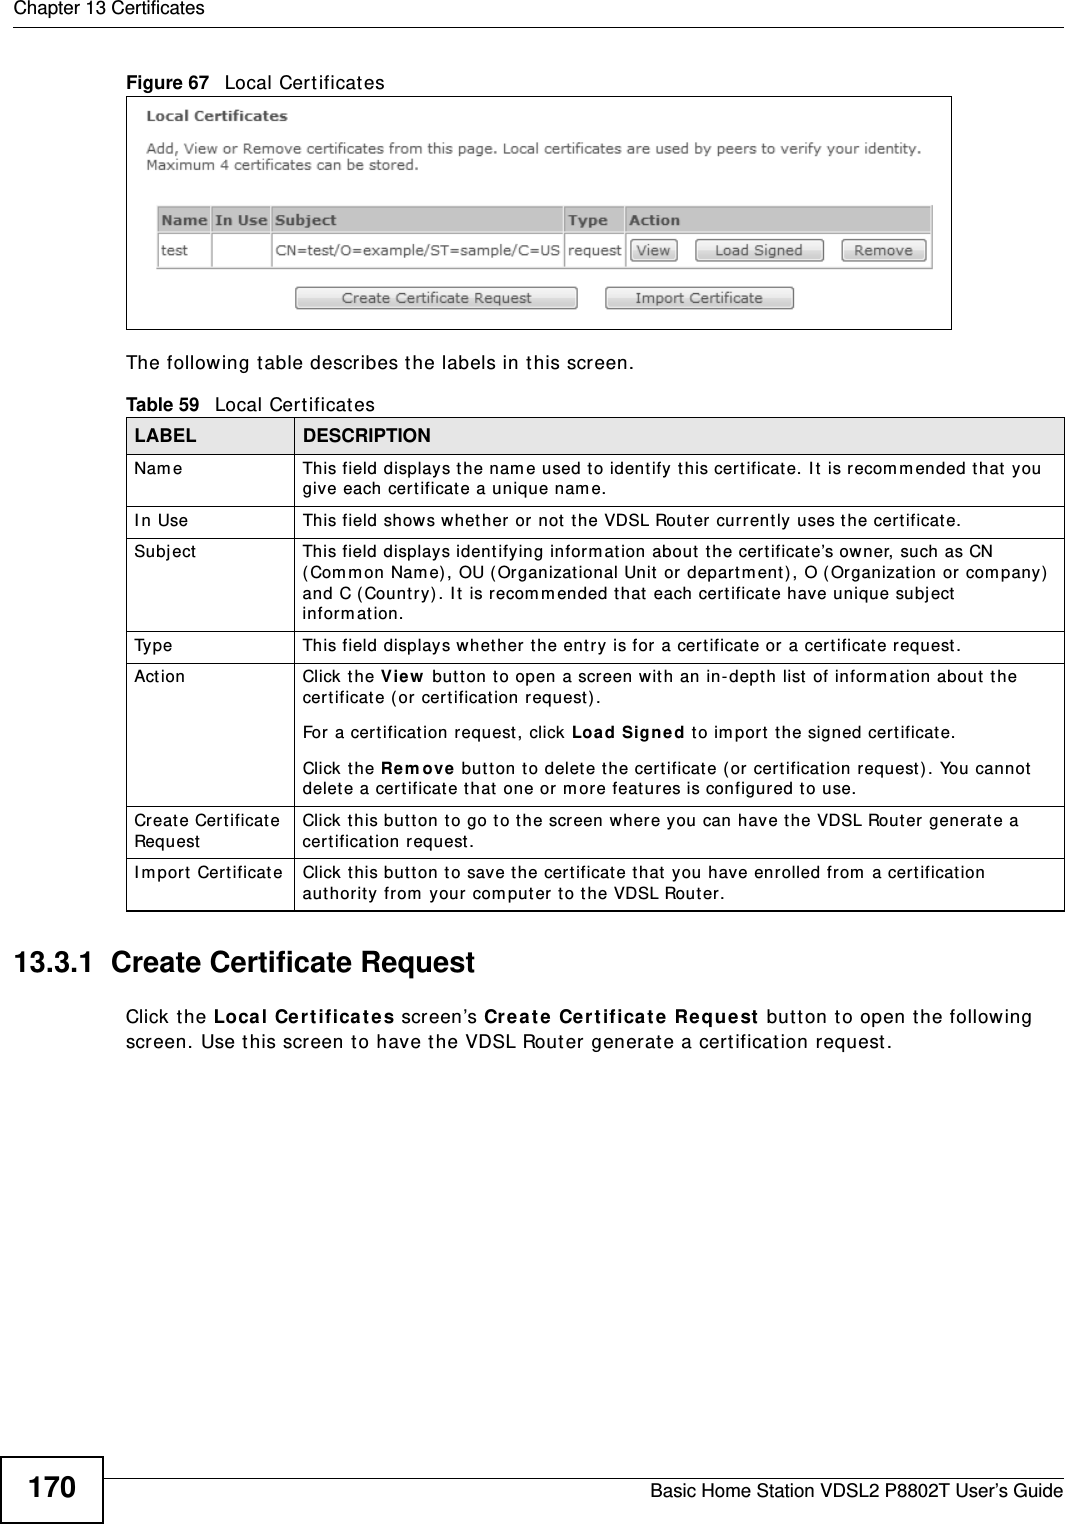 Chapter 13 CertificatesBasic Home Station VDSL2 P8802T User’s Guide170Figure 67   Local Certificat es The following t able describes t he labels in t his screen. 13.3.1  Create Certificate Request Click the Local Ce rt ifica t es screen’s Cr eat e  Cer t ificate Requ est  button to open the following screen. Use t his screen to have the VDSL Router generat e a certificat ion request .Table 59   Local Certificat esLABEL DESCRIPTIONNam e This field displays the nam e used to identify  t his certificat e. I t is recom m ended that  you give each cert ificate a unique nam e. I n Use This field show s whet her or not t he VDSL Rout er  currently uses the cert ificat e.Subject This field displays ident ifying inform at ion about  t he cert ificat e’s owner, such as CN ( Com m on Nam e) , OU (Organizat ional Unit  or depart m ent ), O (Or ganizat ion or com pany)  and C (Country) . I t is recom m ended t hat  each cert ificate have unique subject  inform at ion. Type This field displays whet her t he entry is for a cert ificat e or  a cert ificat e request .Action Click the View  but ton t o open a screen wit h an in- dept h list  of inform at ion about  t he cert ificat e ( or cert ification request) .For a cert ificat ion request , click Load Signed to im port the signed cert ificate.Click the Re m ove  butt on t o delet e t he cert ificat e ( or cert ificat ion request) . You cannot delet e a cert ificat e that  one or  m ore features is configured to use.Creat e Cert ificate Requ estClick this but ton t o go to t he scr een where you can hav e t he VDSL Rout er generate a cer tificat ion request .I m por t Cert ificat e Click this but ton t o save the cer tificate that  you have enrolled from  a certificat ion authority from  your com puter t o t he VDSL Rout er.